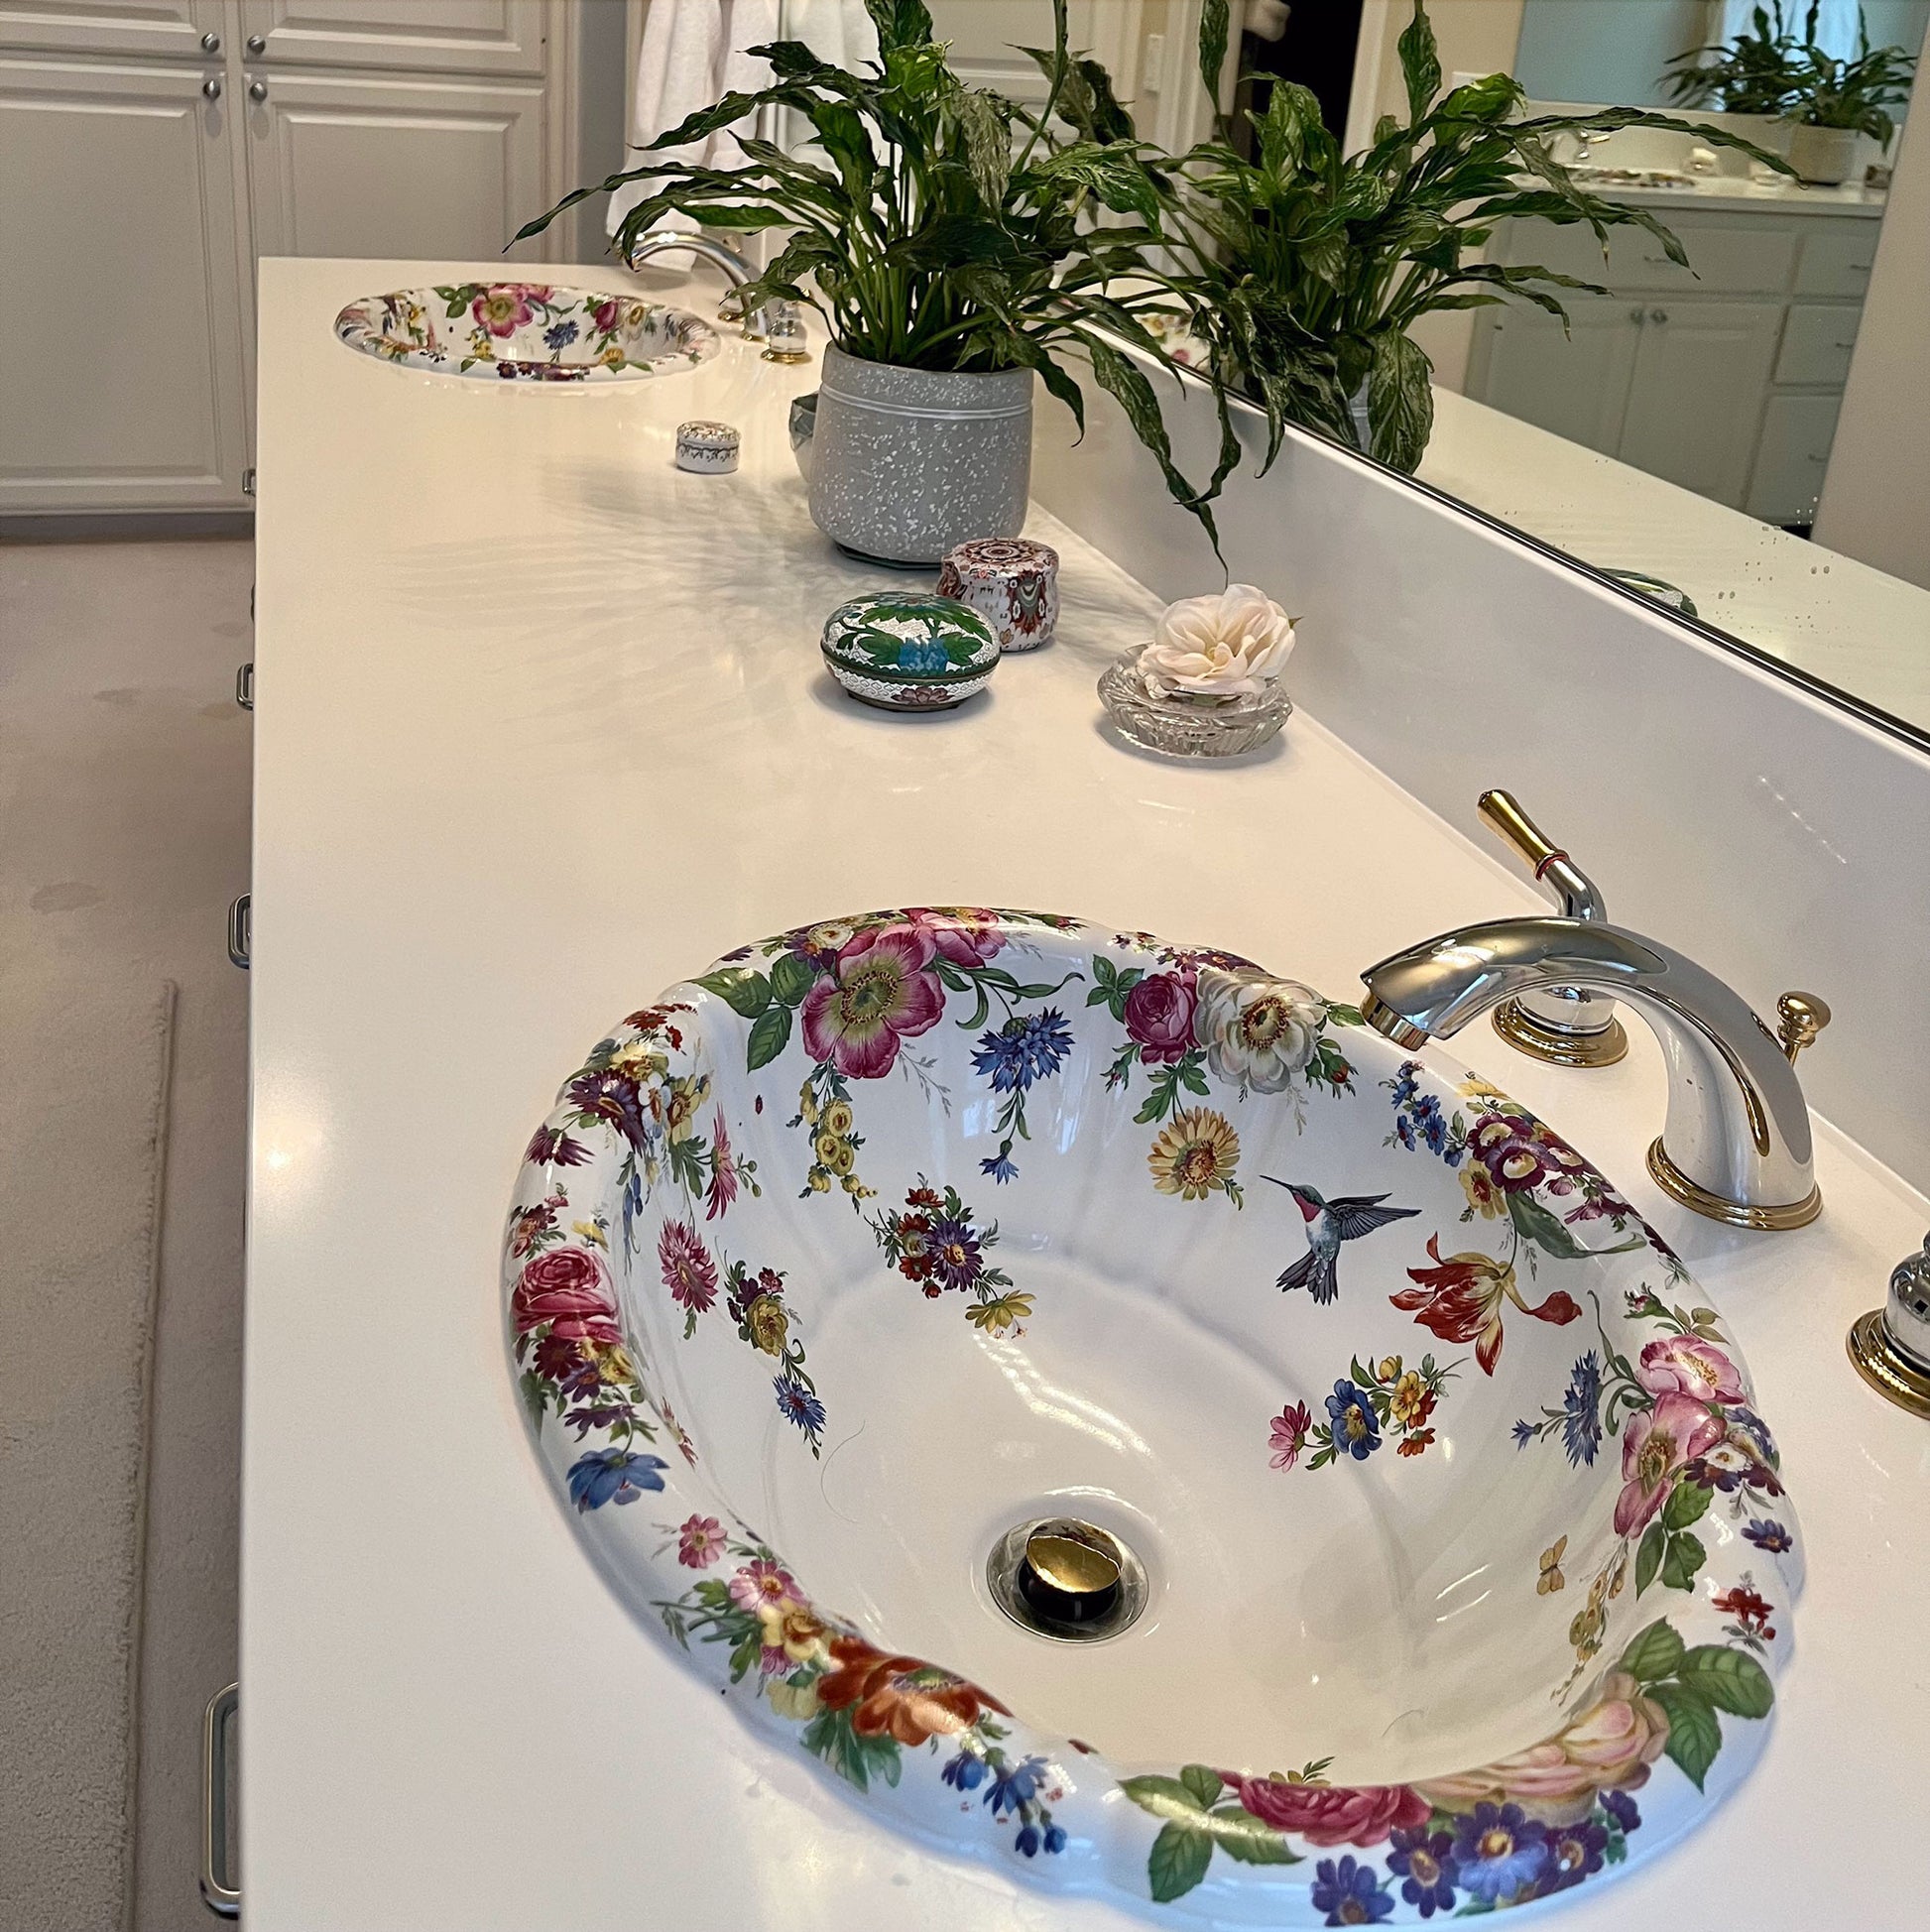 Master bathroom sinks painted with flowers and hummingbird